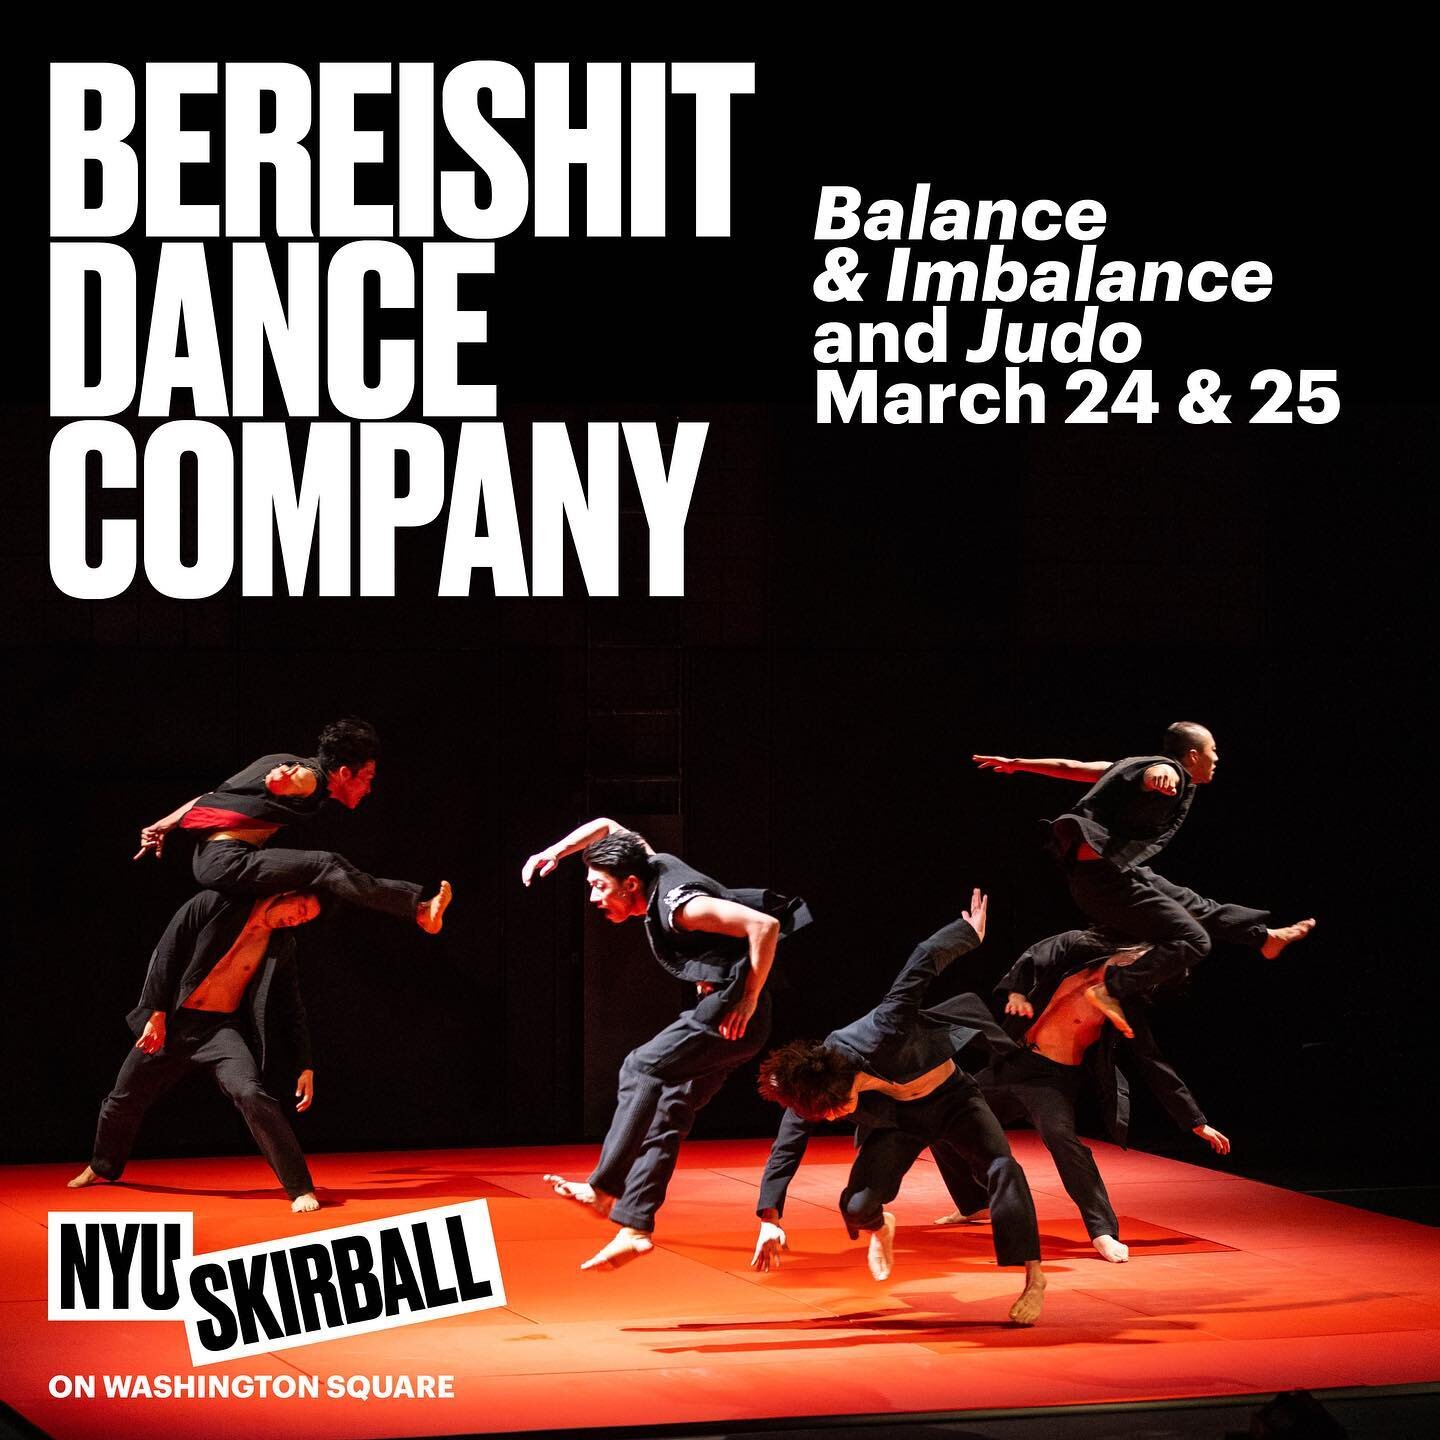 From our Friends at NYU Skirball: 

This Fri/Sat is Bereishit Dance from Korea, with &ldquo;the explosive force of gymnasts and the smooth exactitude of a K-pop boy band.&rdquo; (New Yorker) 

Our community receives 20% off tickets with the code BDC2